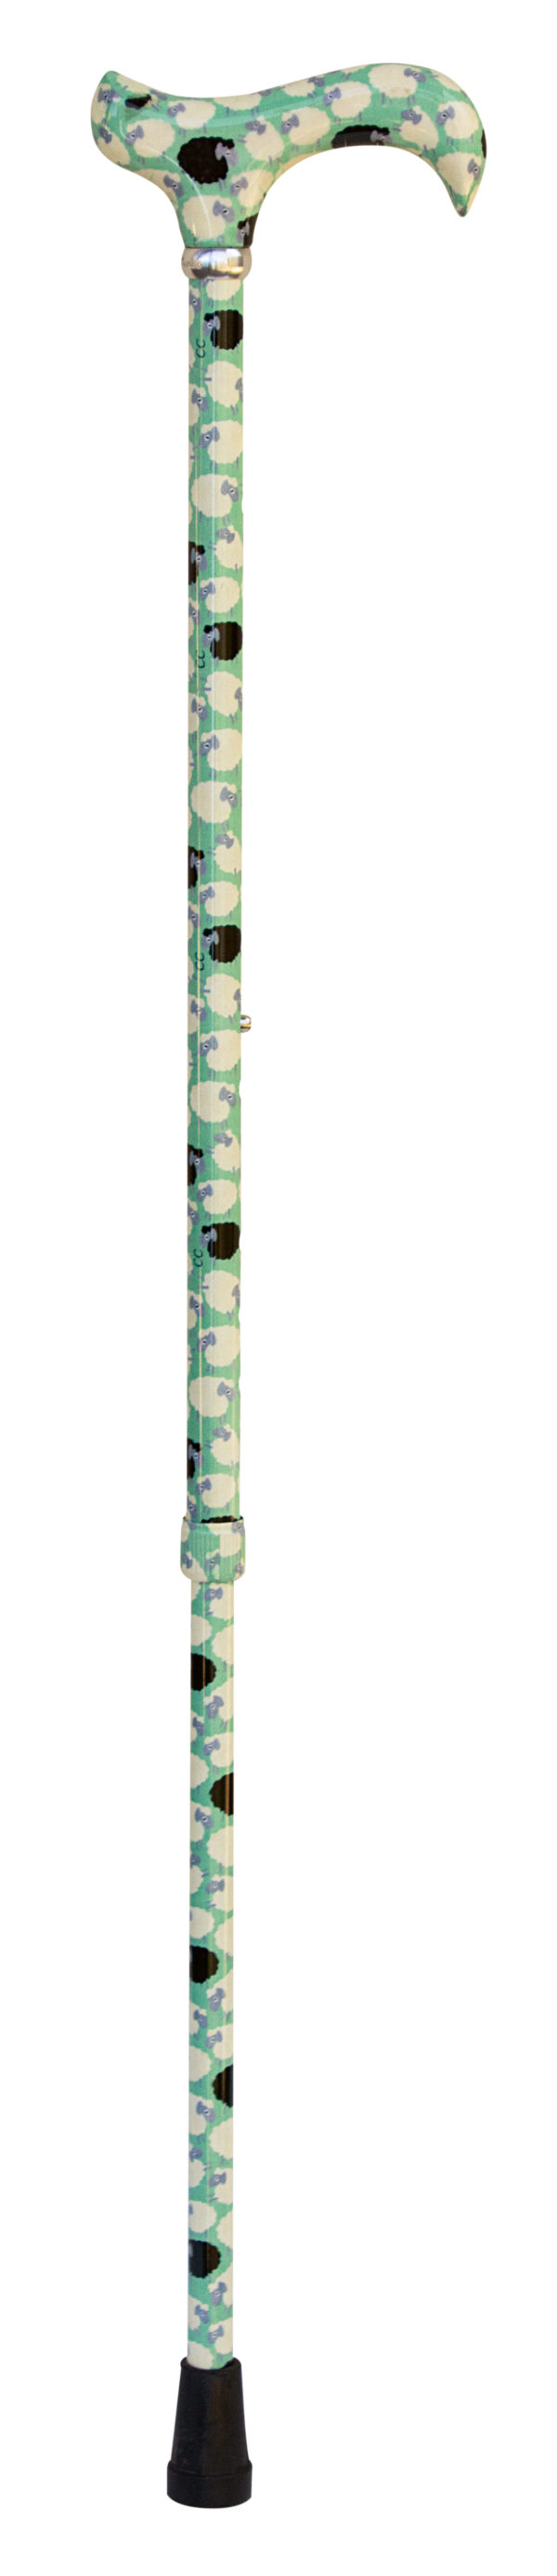 Adjustable Derby Cane with Black Sheep